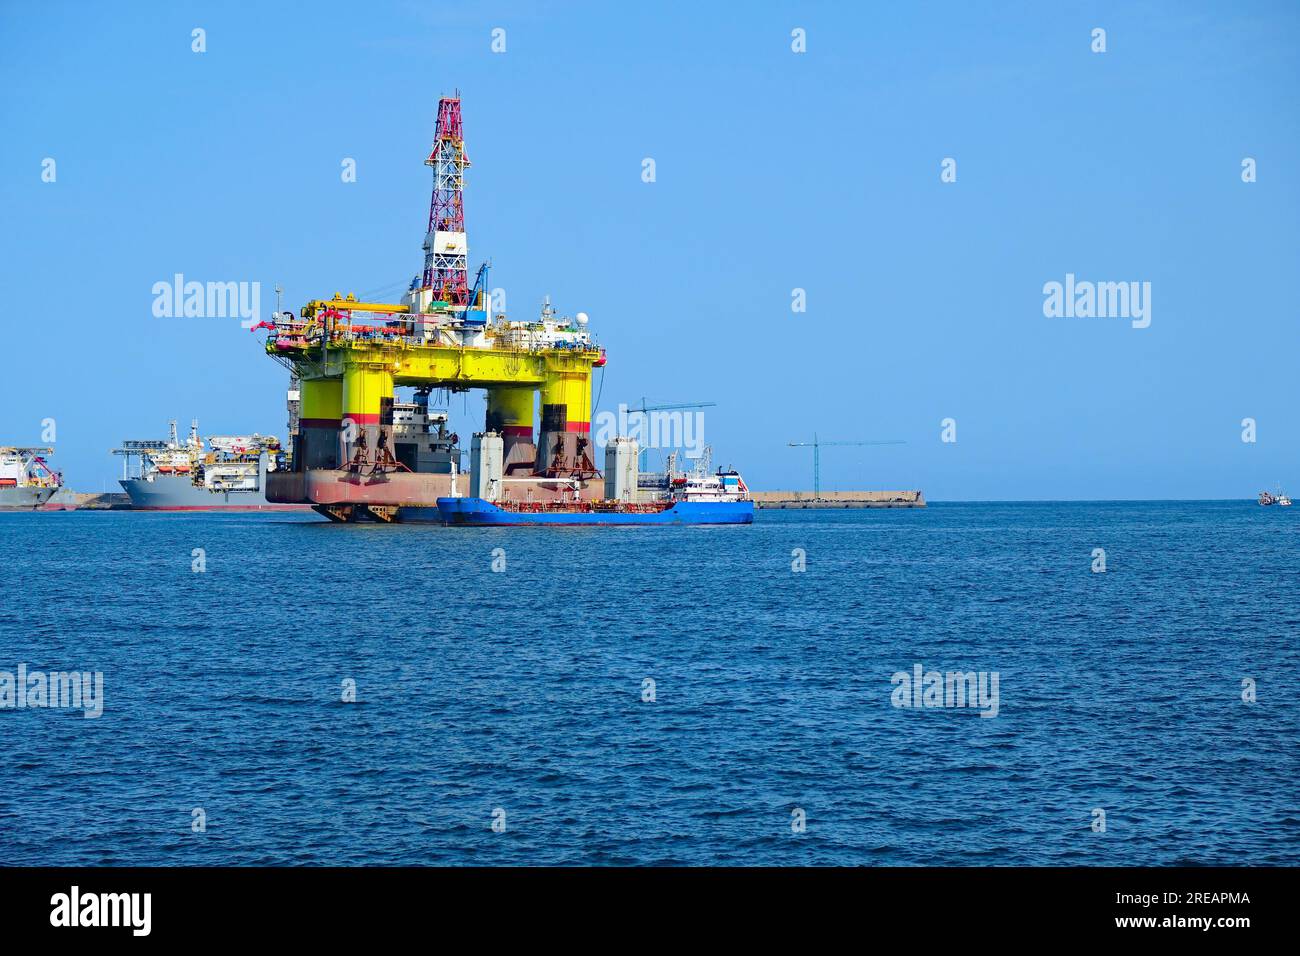 Huge crude oil rig equipment and a service ship on the water. Stock Photo